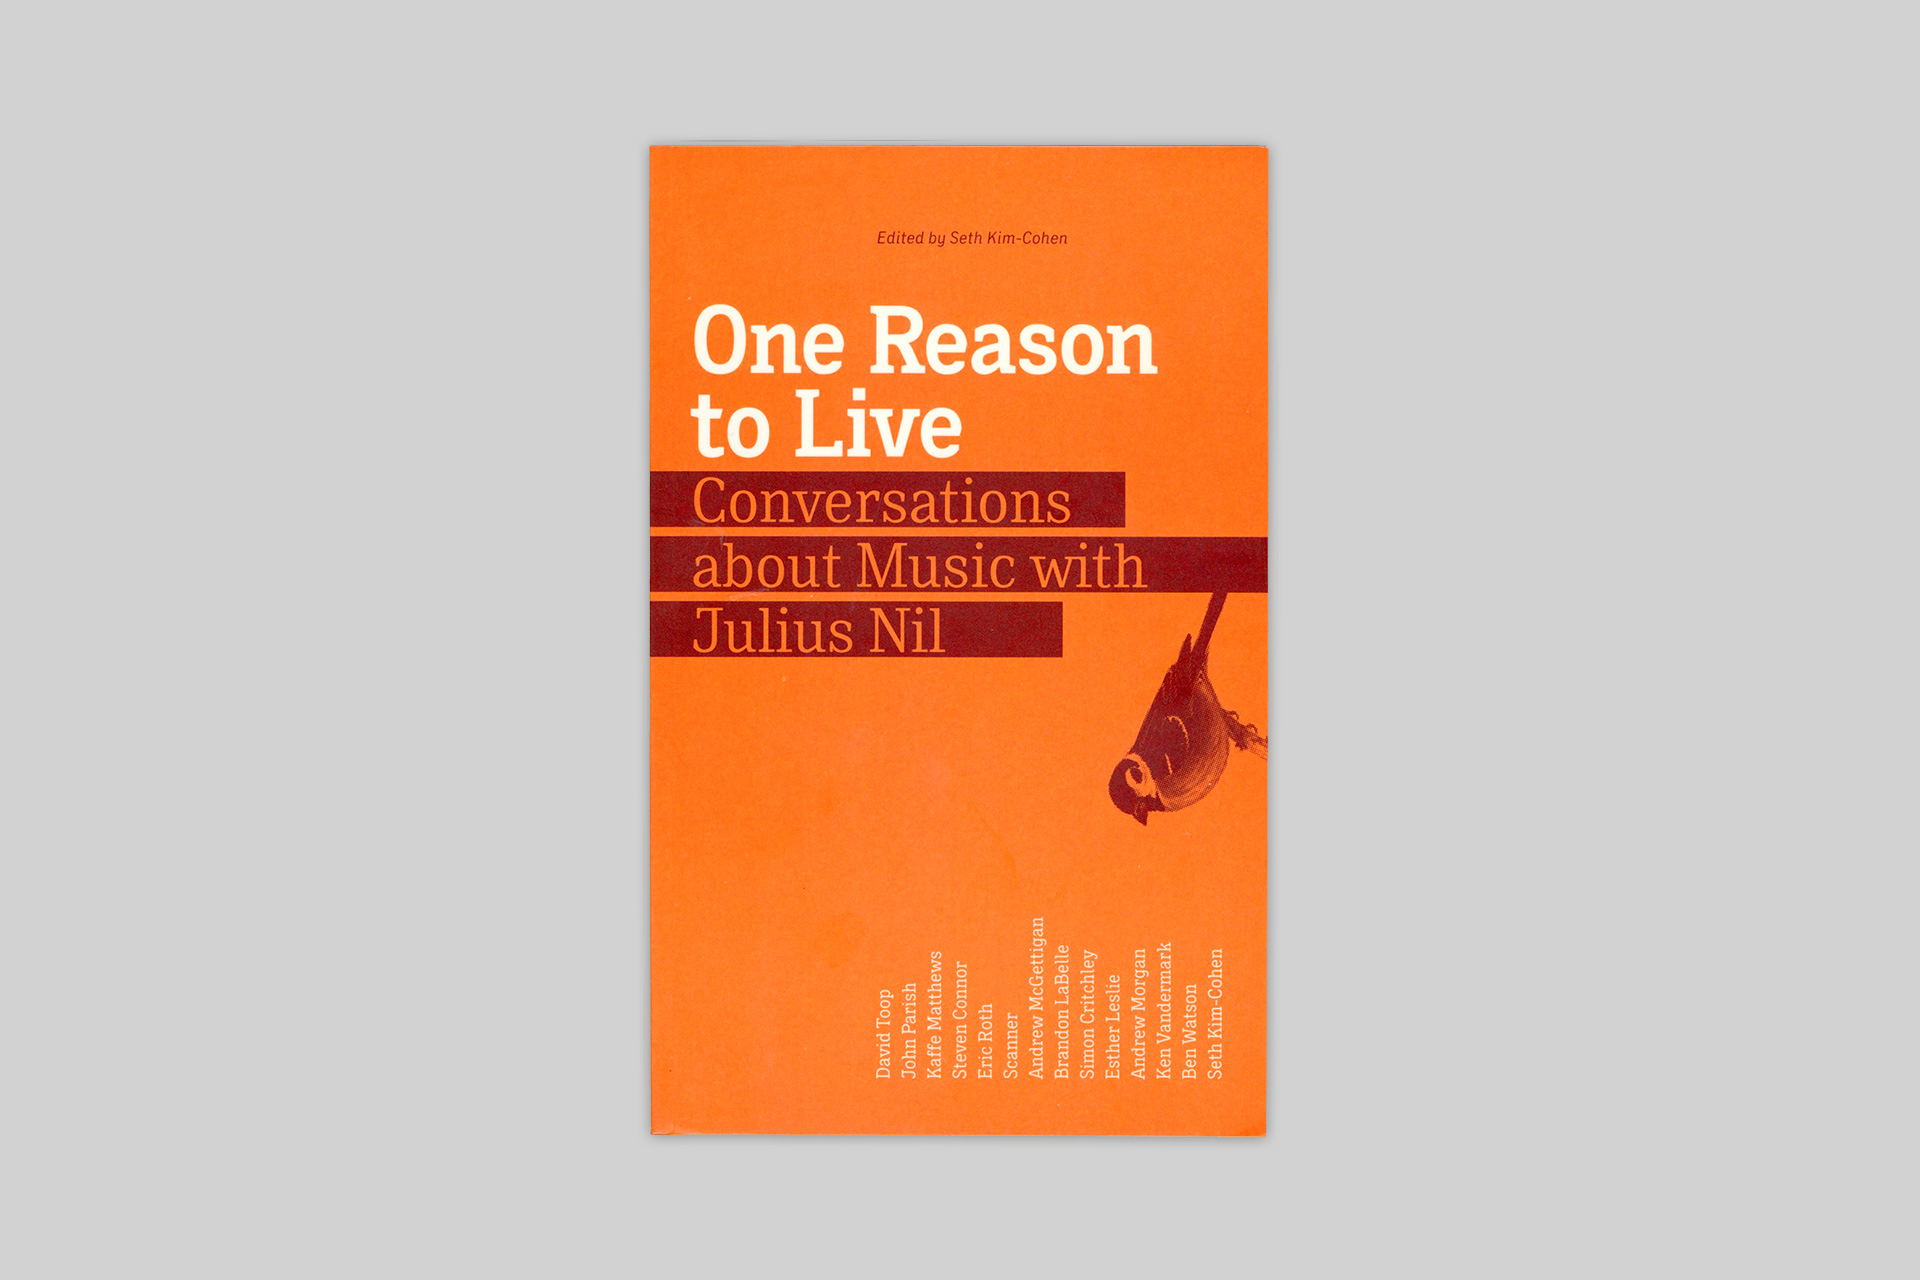 One Reason To Live: Conversations<br/>about Music with Julius Nil